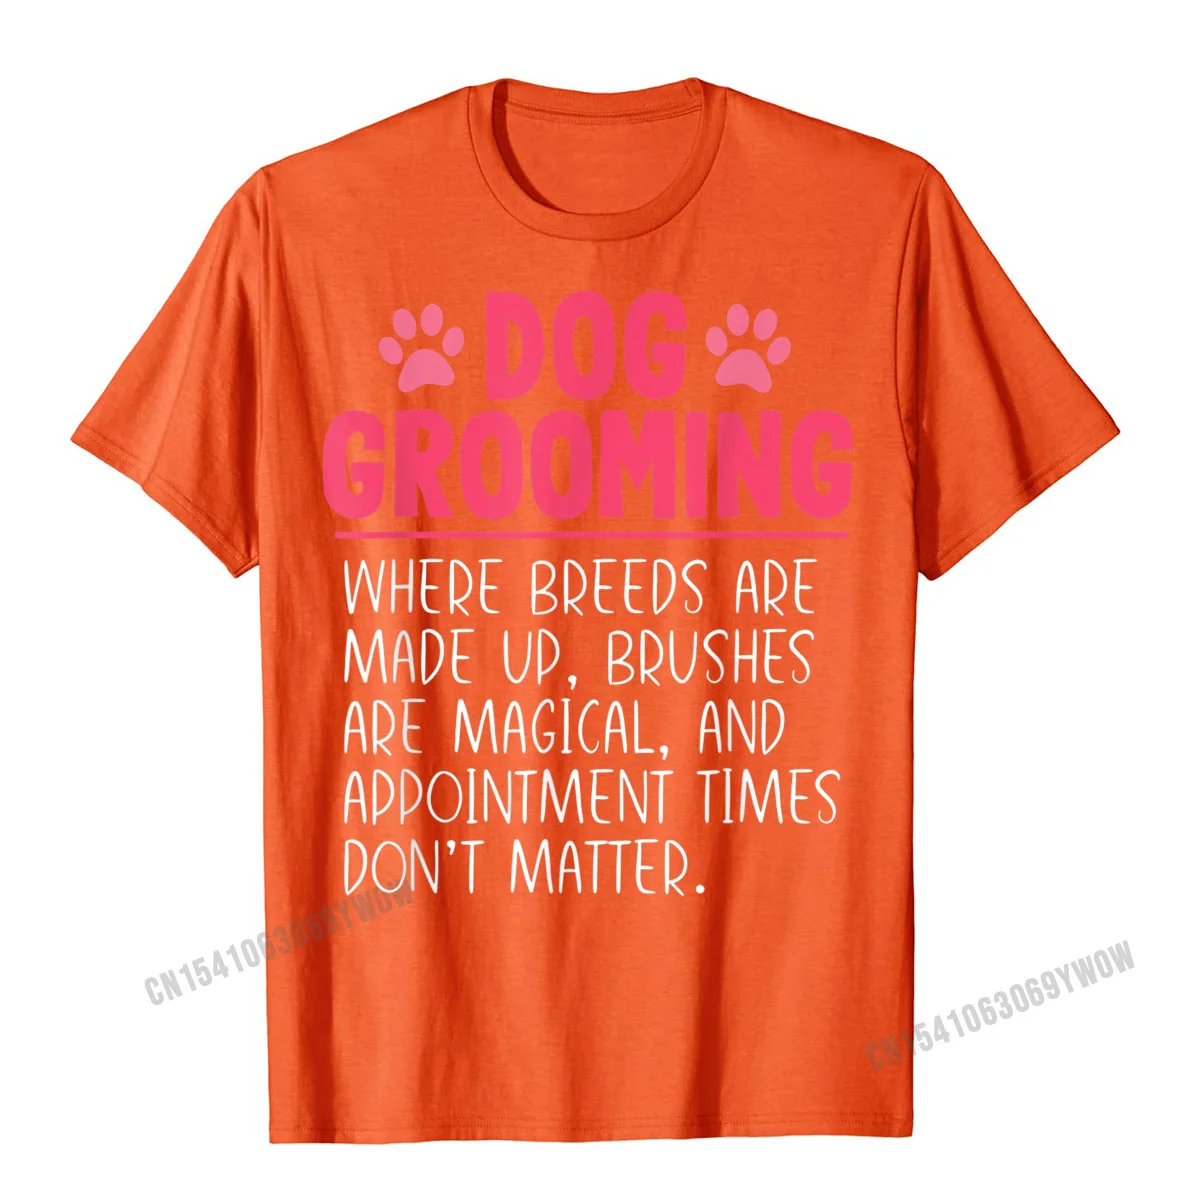 Casual Printed On Tops Shirts for Men 2021 Labor Day Round Neck All Cotton Short Sleeve T-shirts Crazy Tshirts Dog Groomer Funny Breeds Joke Pet Grooming Puppy Care Gift T-Shirt__591 orange